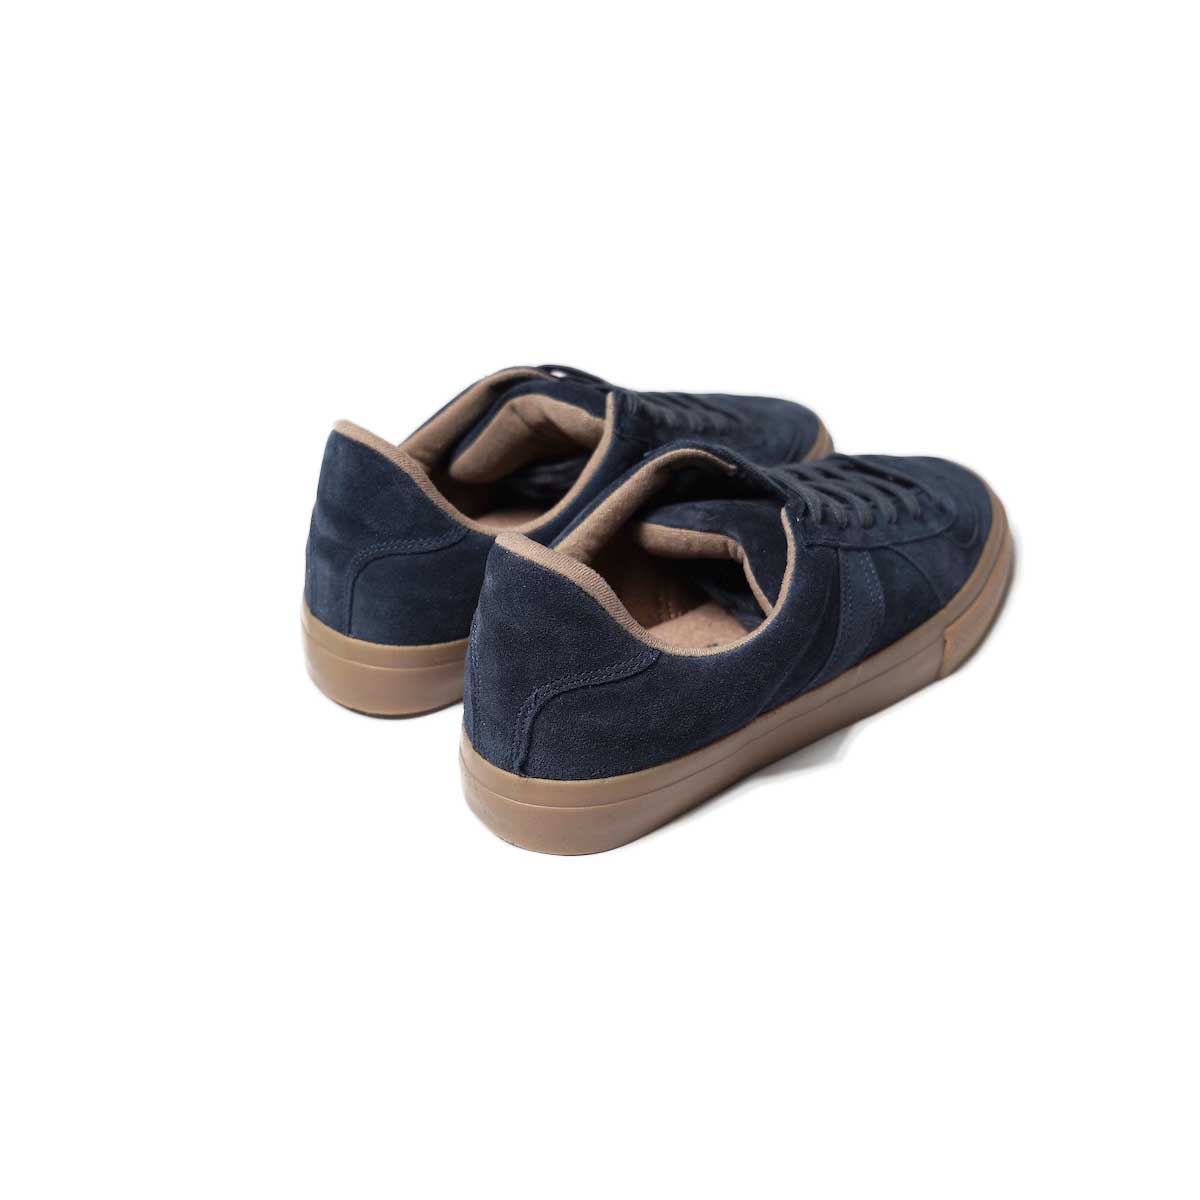 REPRODUCTION OF FOUND / GERMAN MILITARY TRAINER (Dark Navy Suede)背面